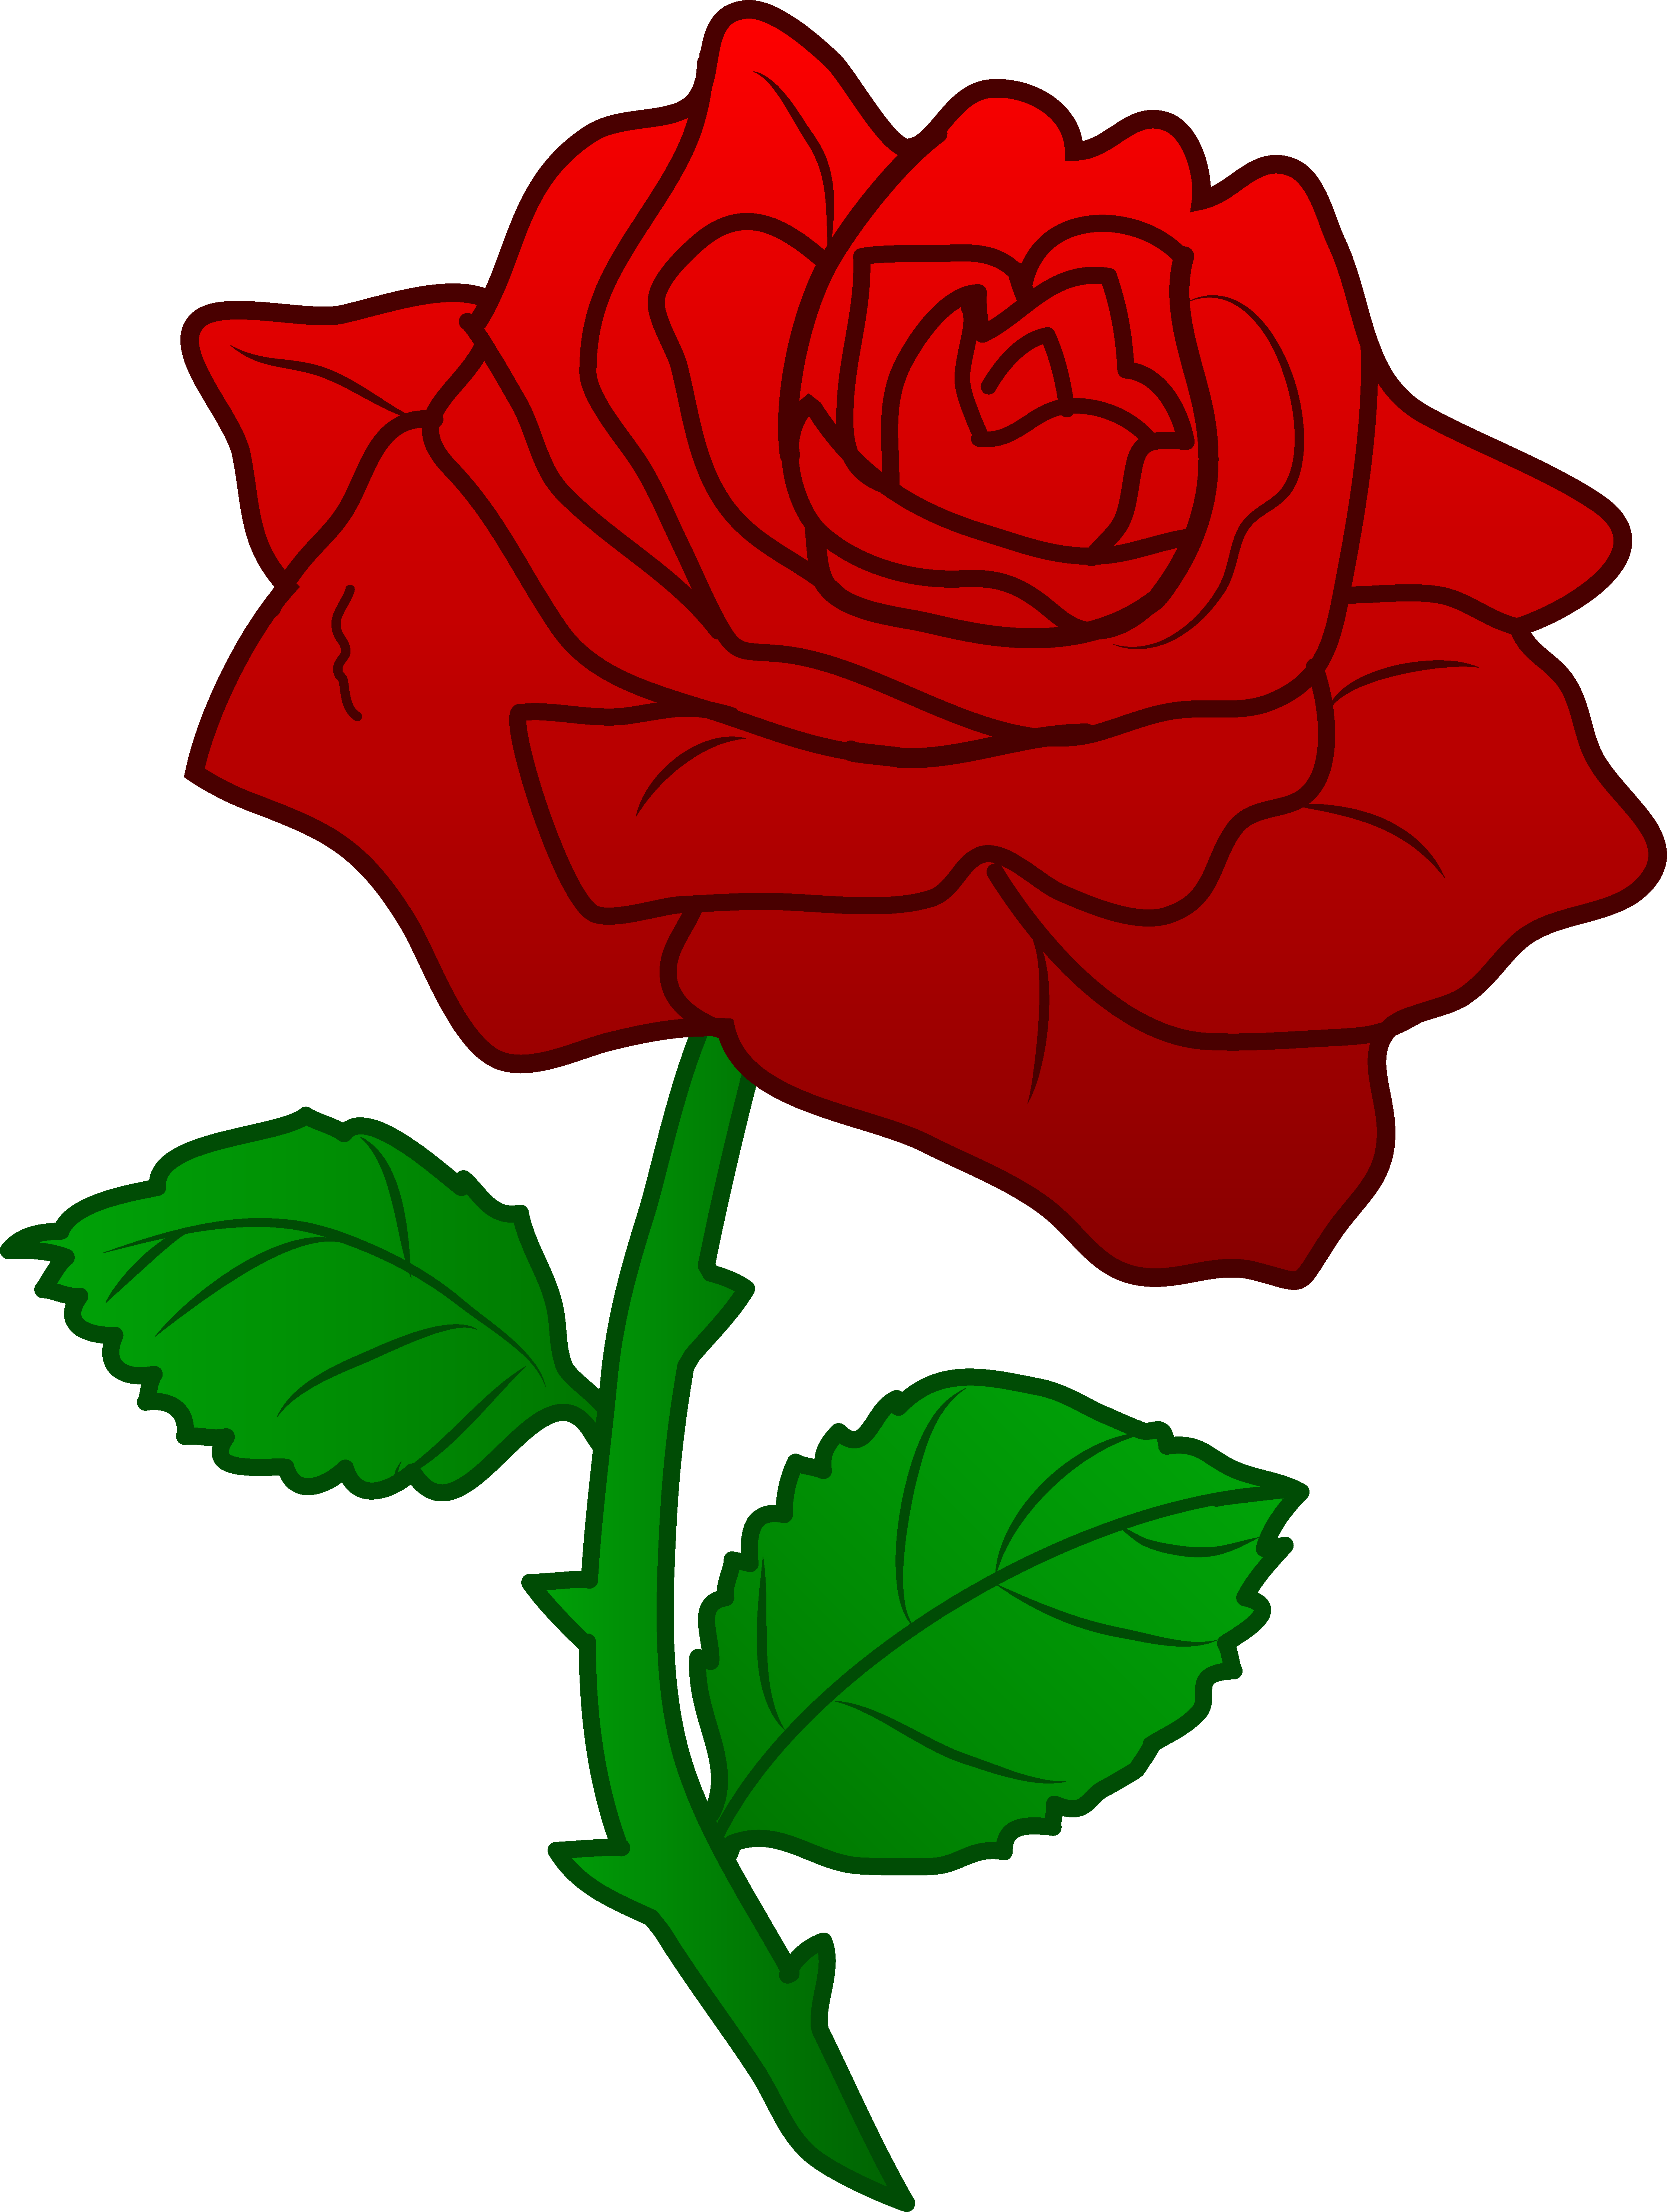 clipart chat rose - photo #11